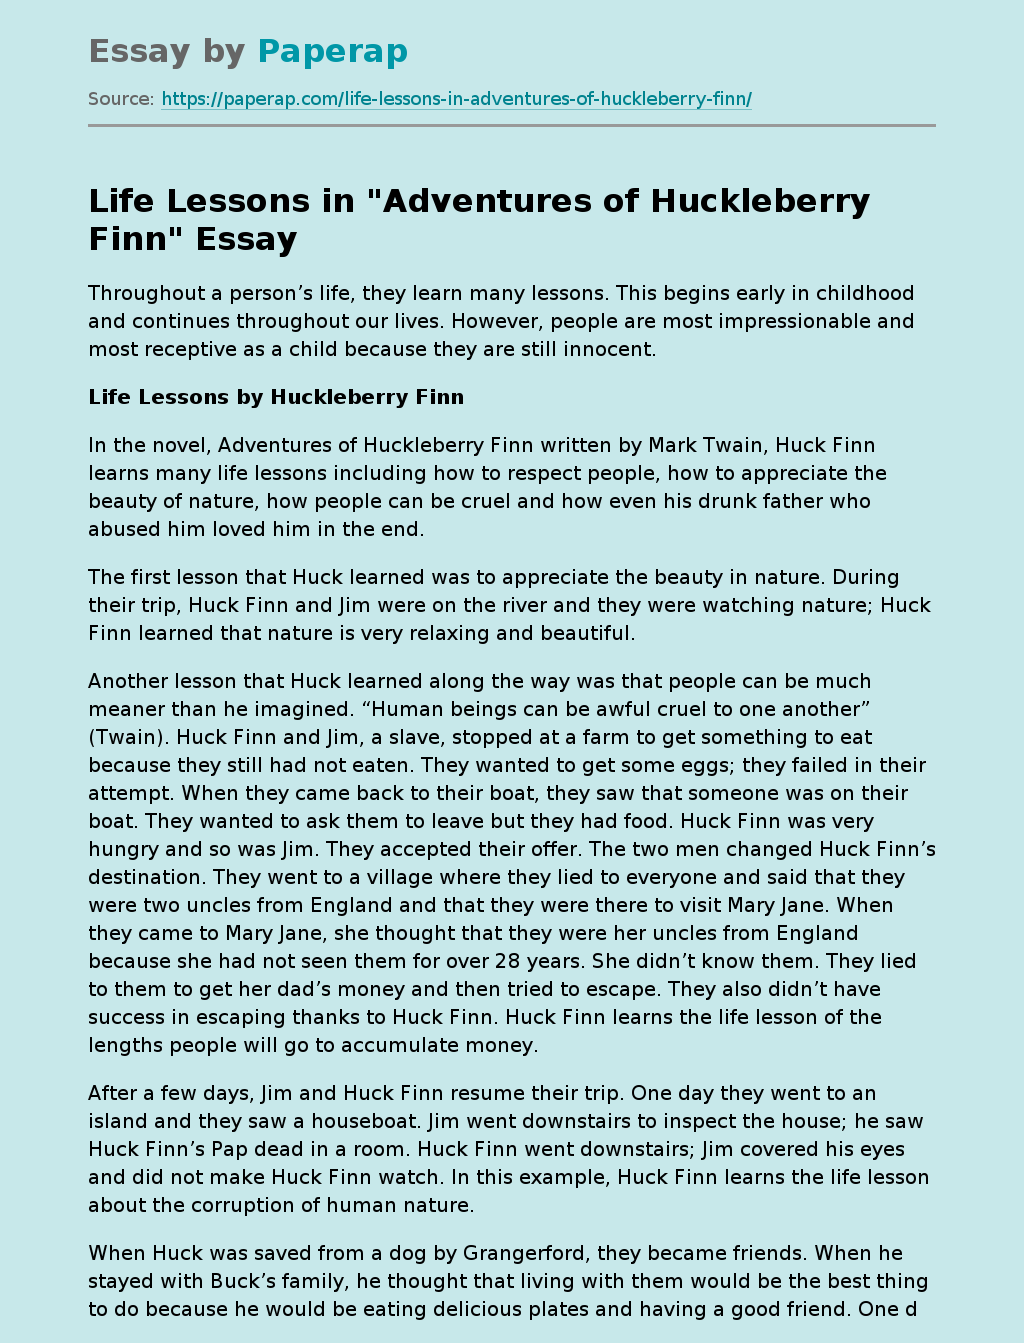 Life Lessons in "Adventures of Huckleberry Finn"